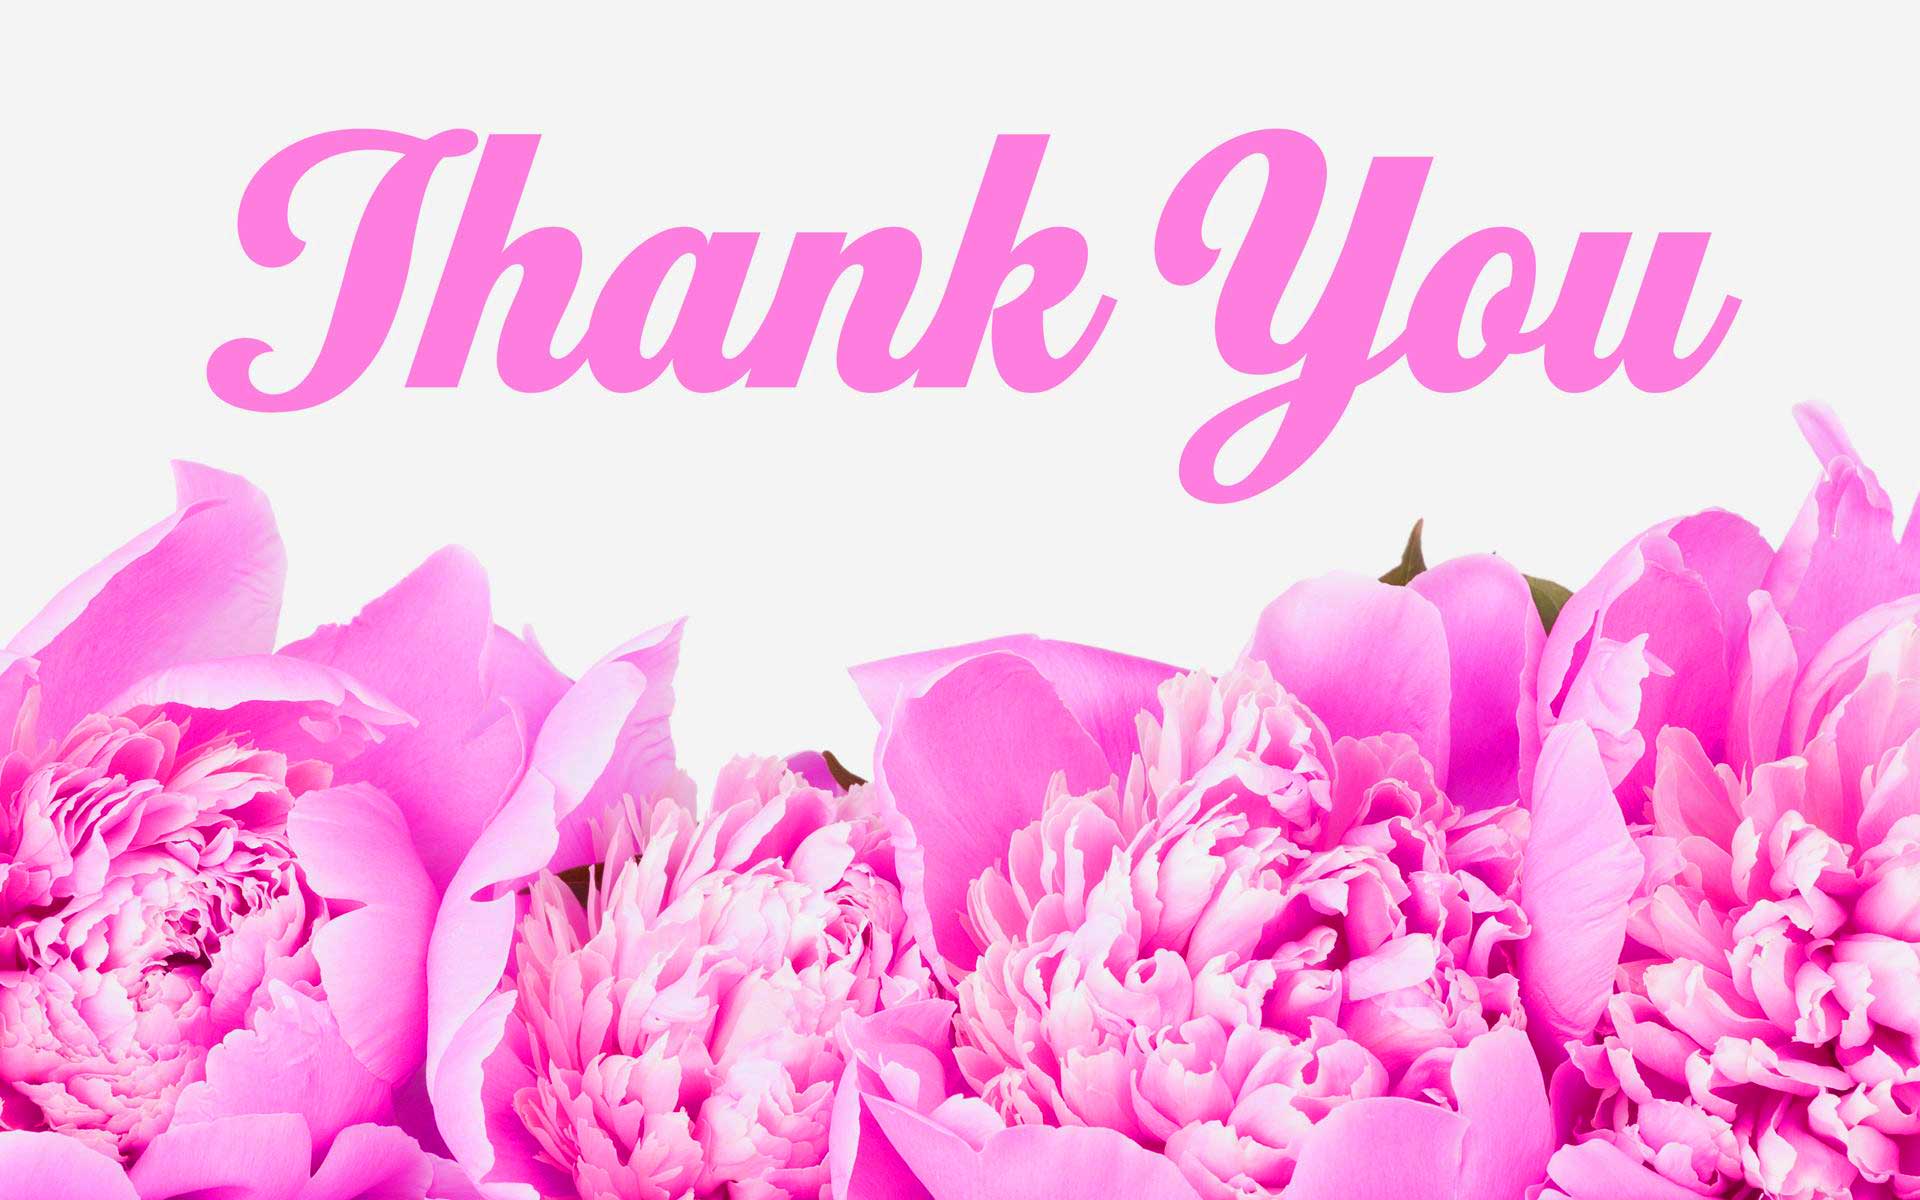 thank-you-images-with-flowers-clipart-panda-free-clipart-images-you-can-also-take-print